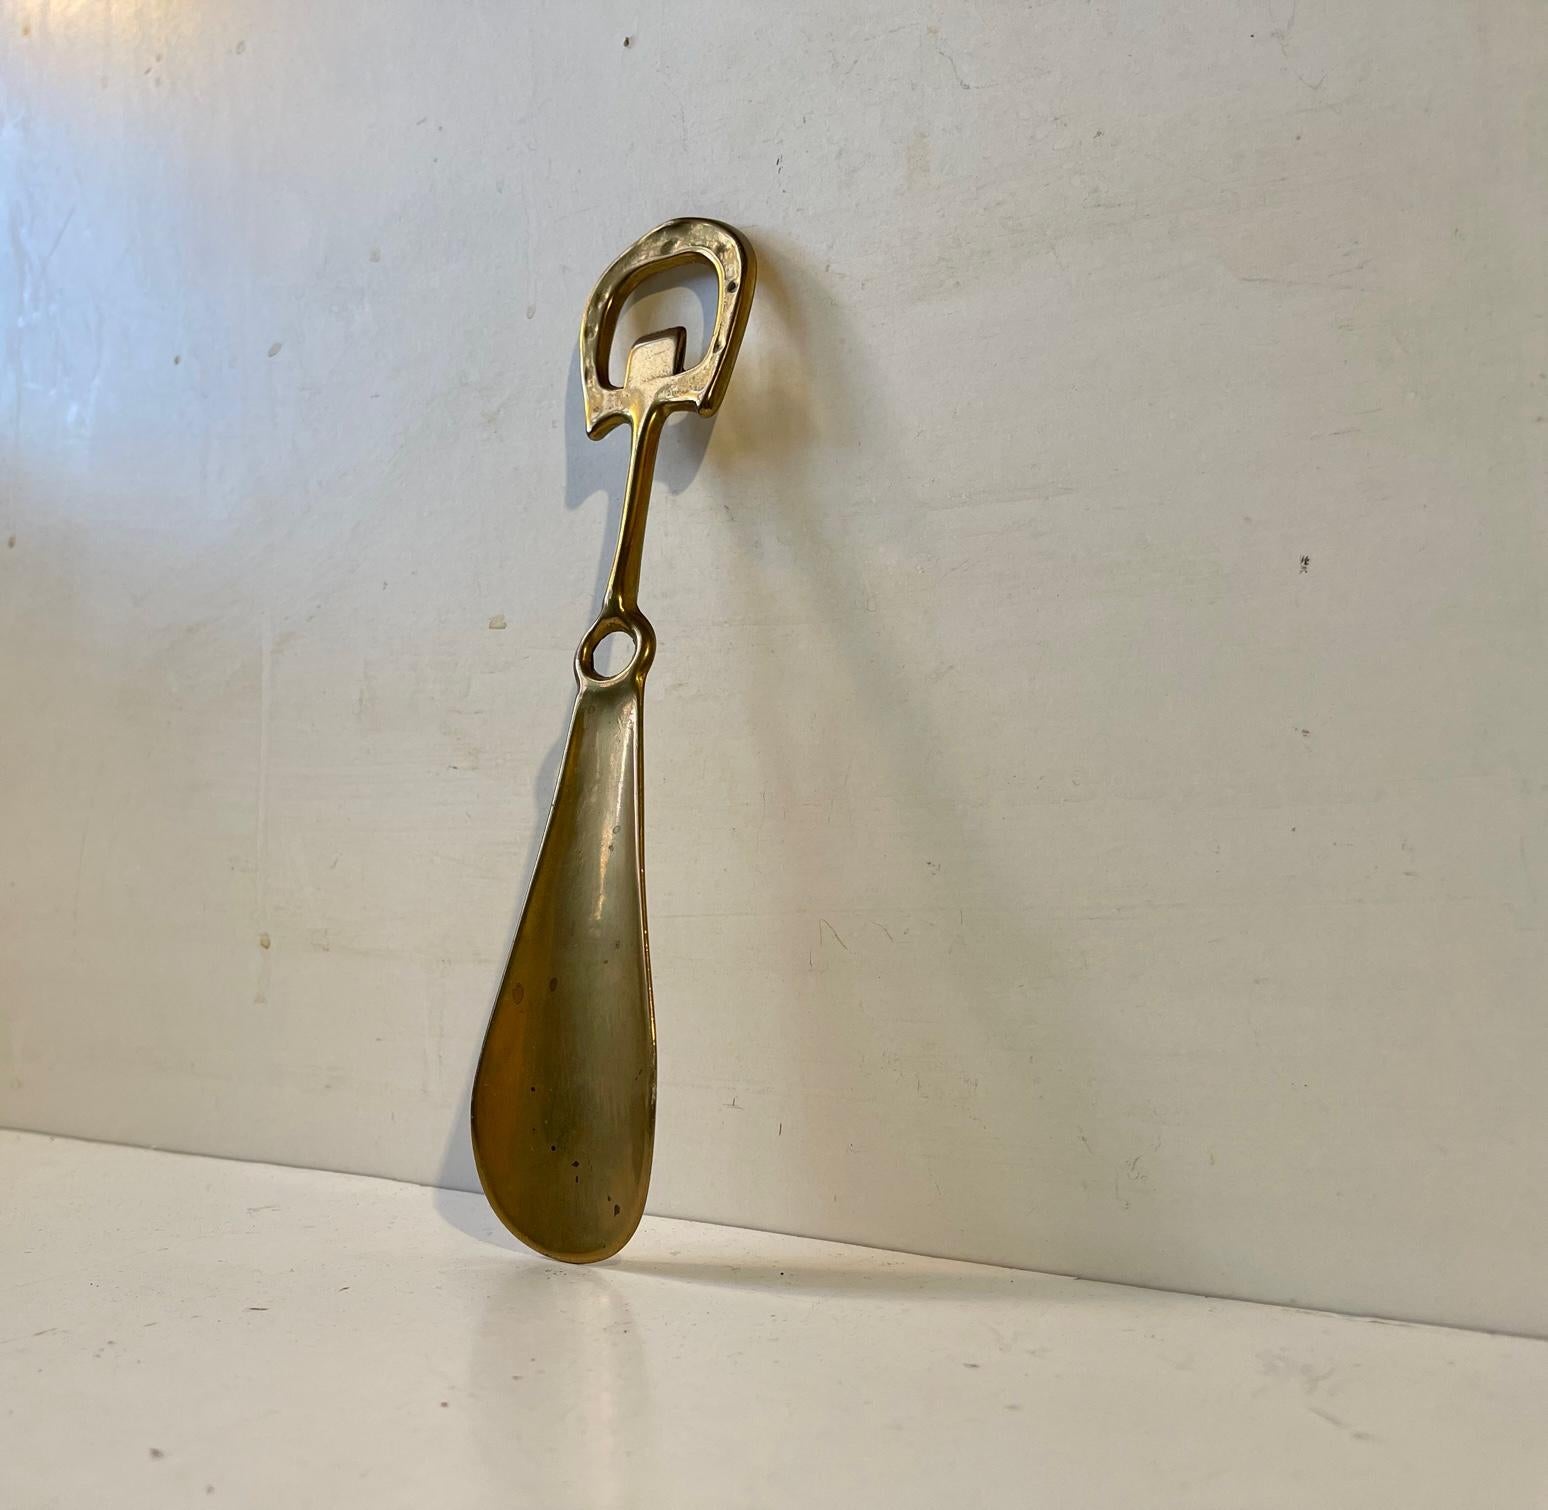 Elegantly combined shoe horn and bottle cap opener in brass decorated with a horseshoe top. It can be wall hung in your entrance. It was made in Denmark circa 1930-1940, probably by N. Jal or N.D.R. Measurements: l: 22 cm, w: 4 cm.